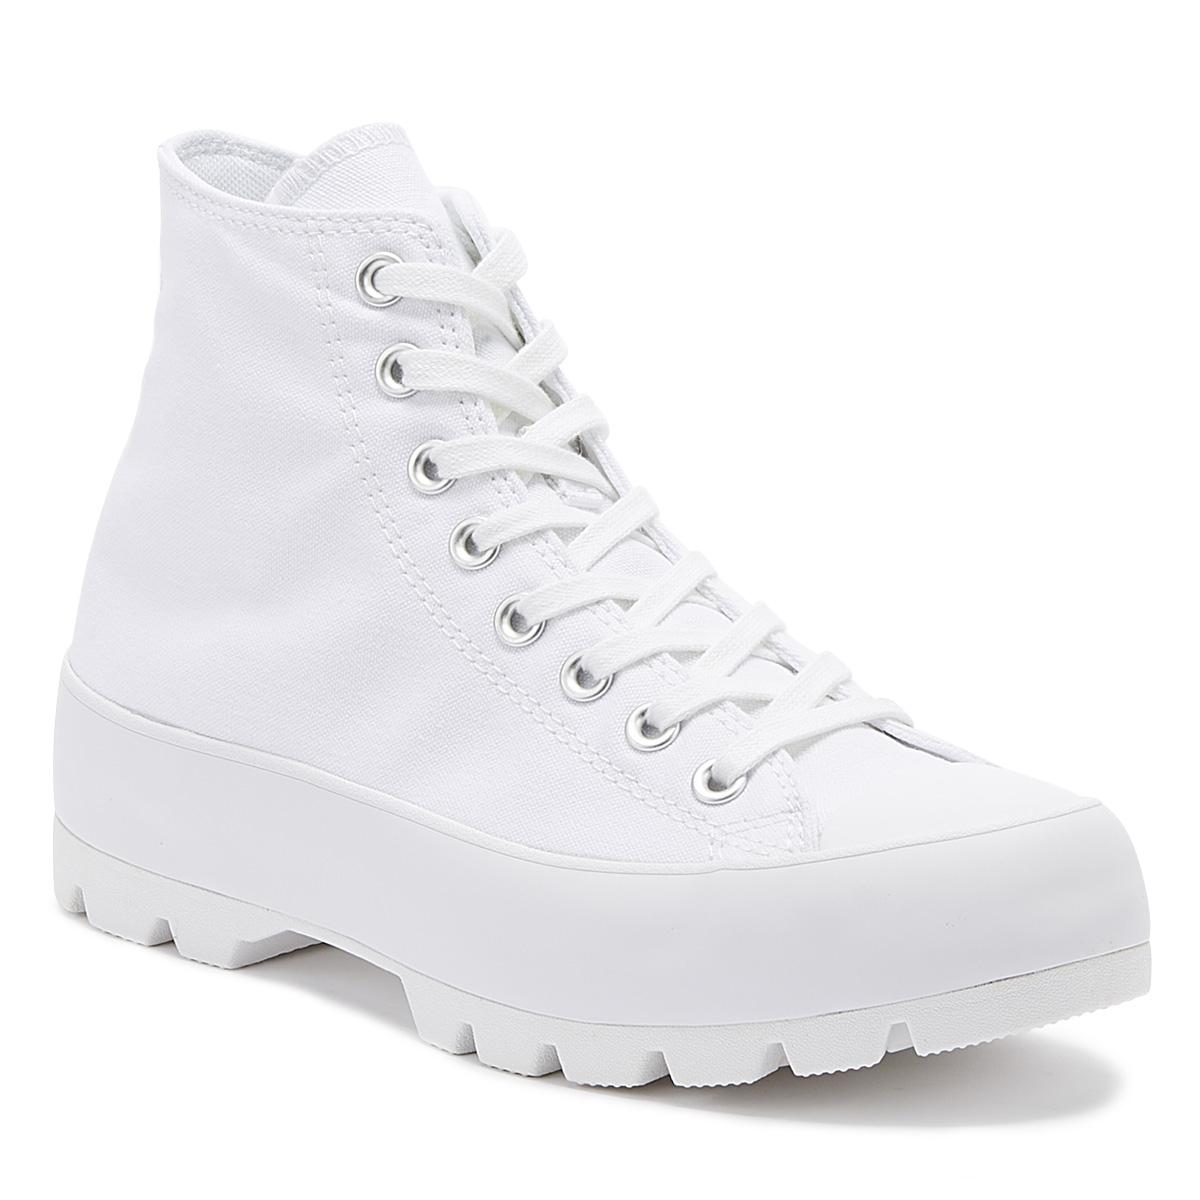 Converse Canvas Chuck Taylor All Star Lugged Womens White Hi Trainers ...